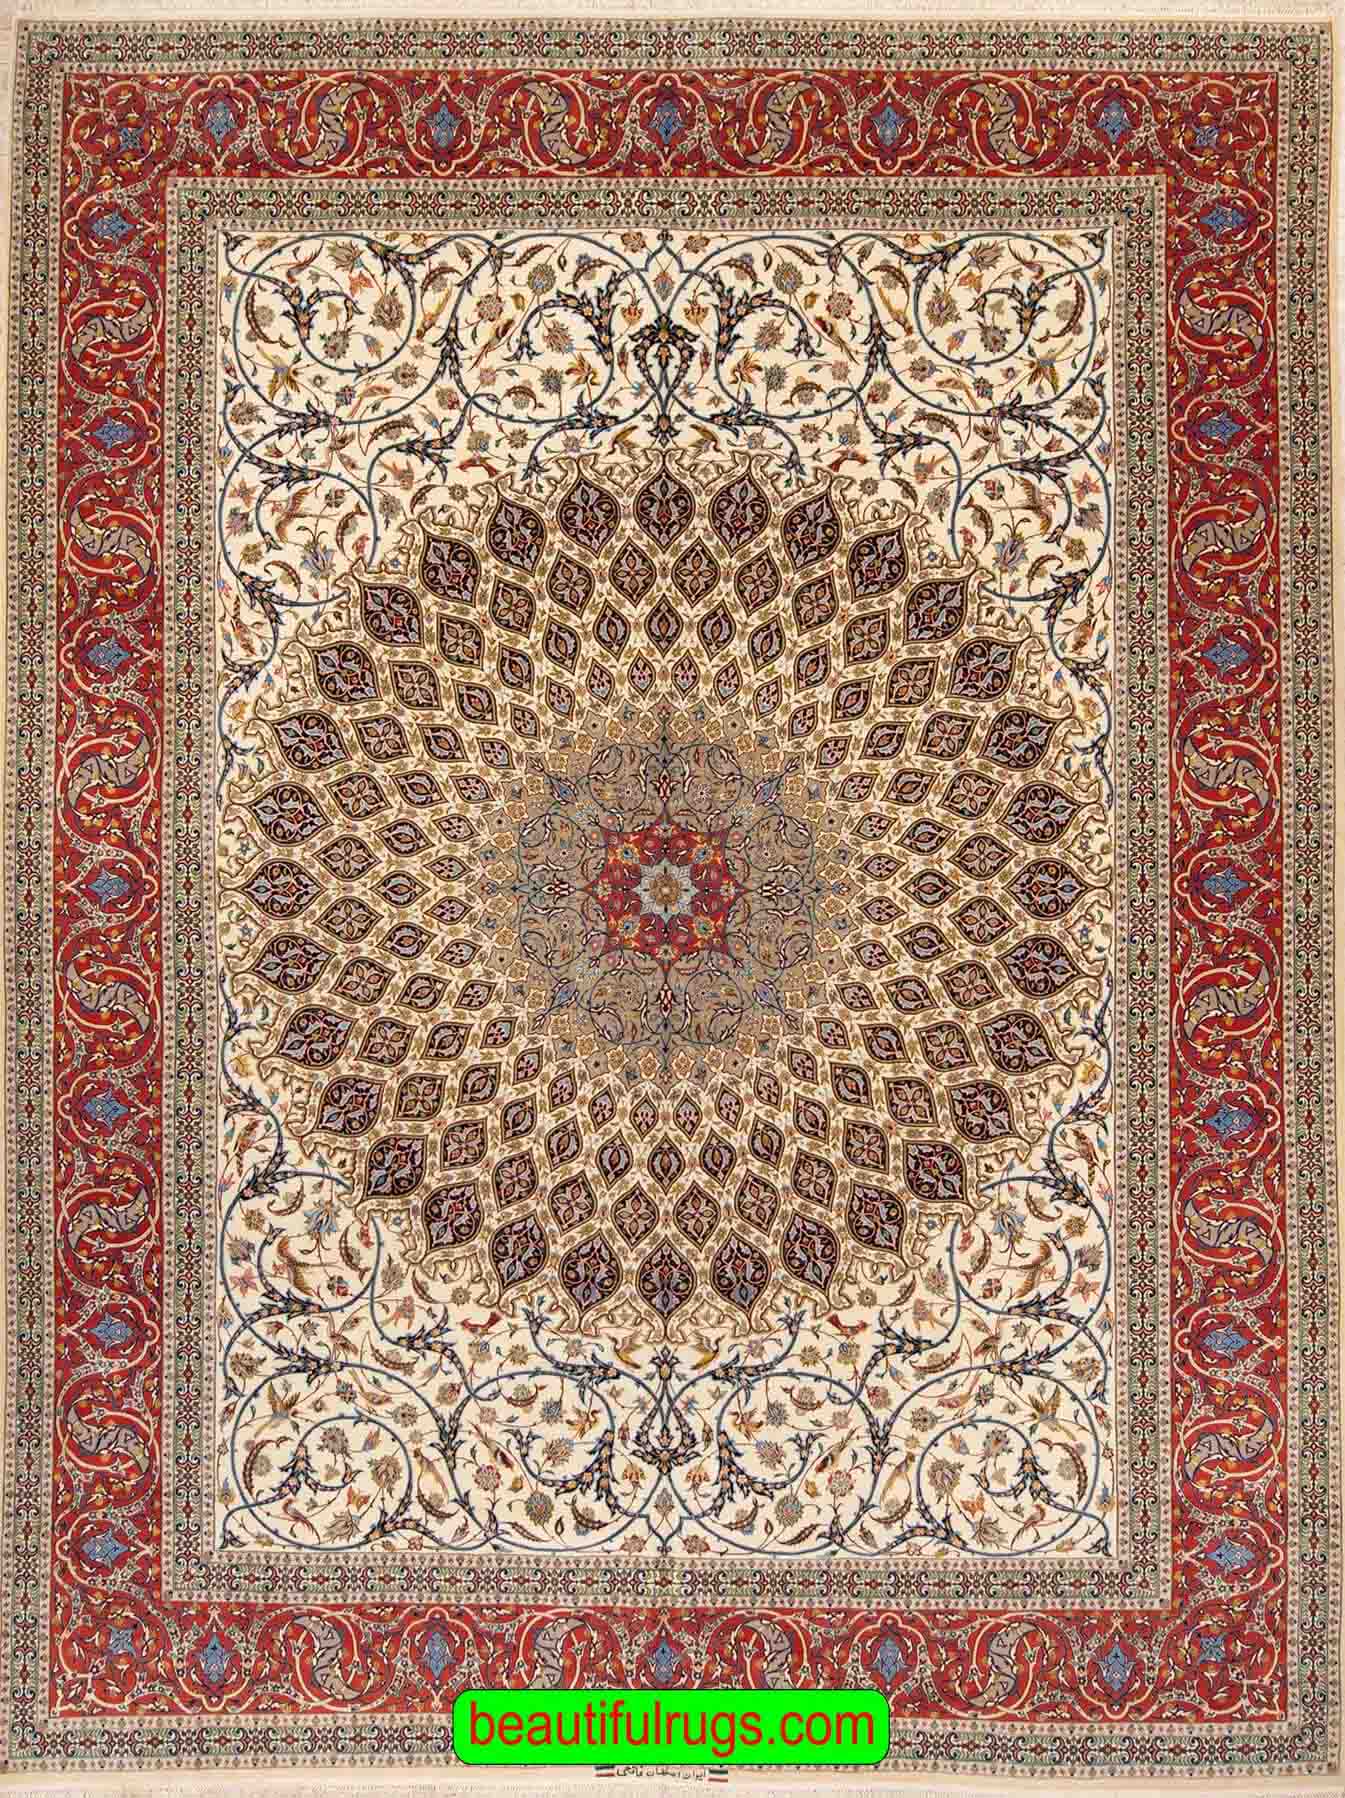 Handmade Persian Isfahan wool and silk rug, beige color background and rustic red border with round center medallion. Size 10.2x13.7.